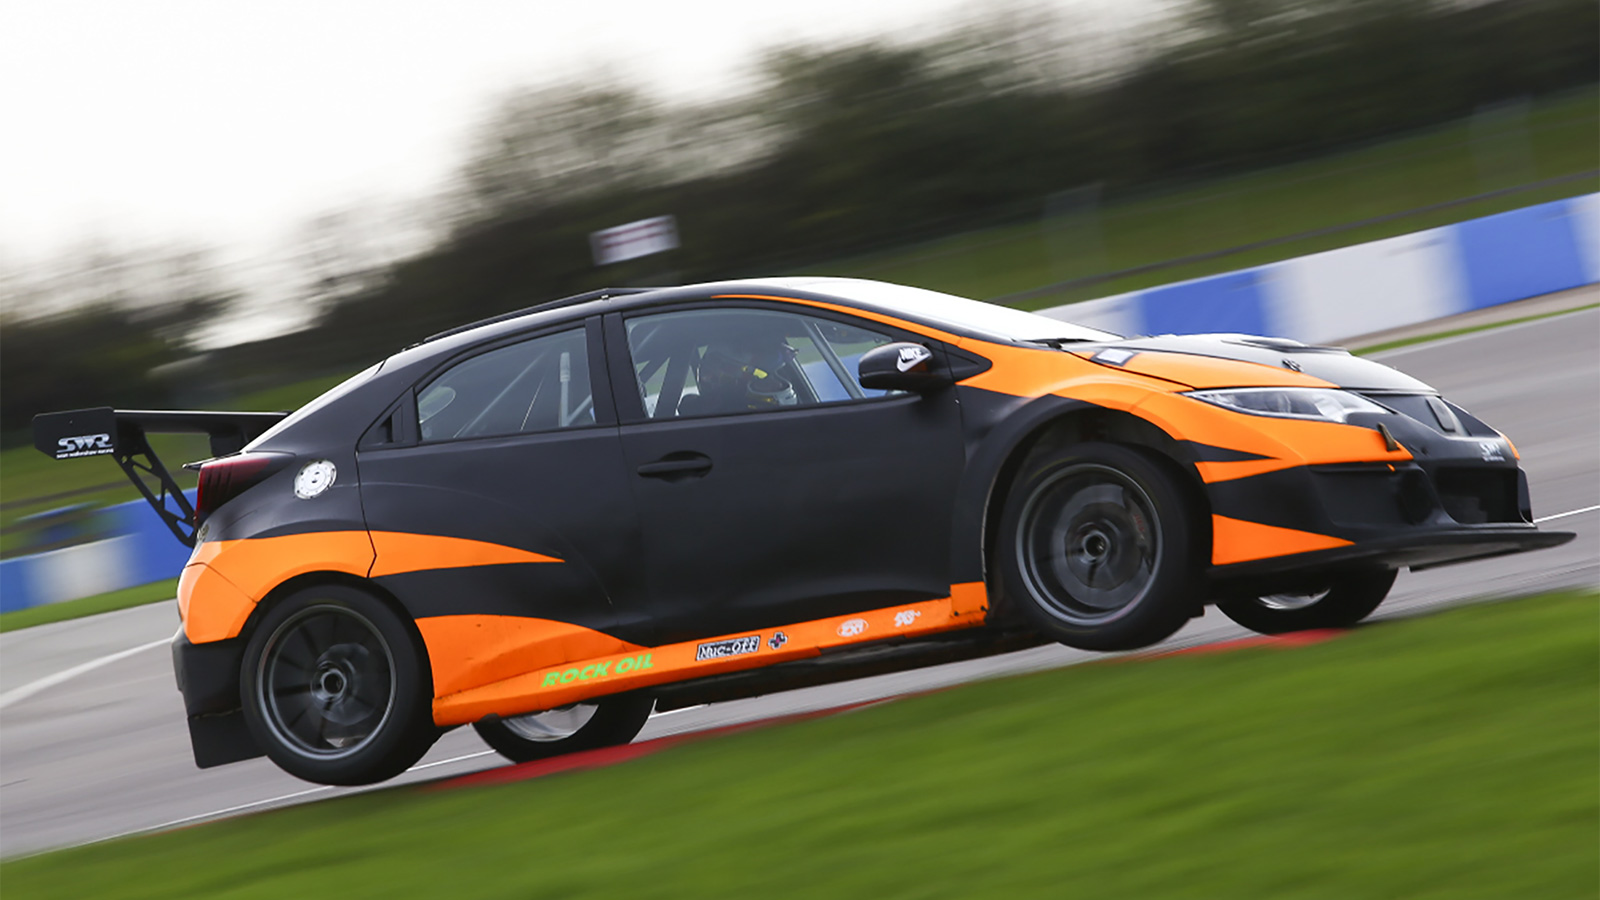 TCR UK team SWR delighted with ‘impeccable’ first test.